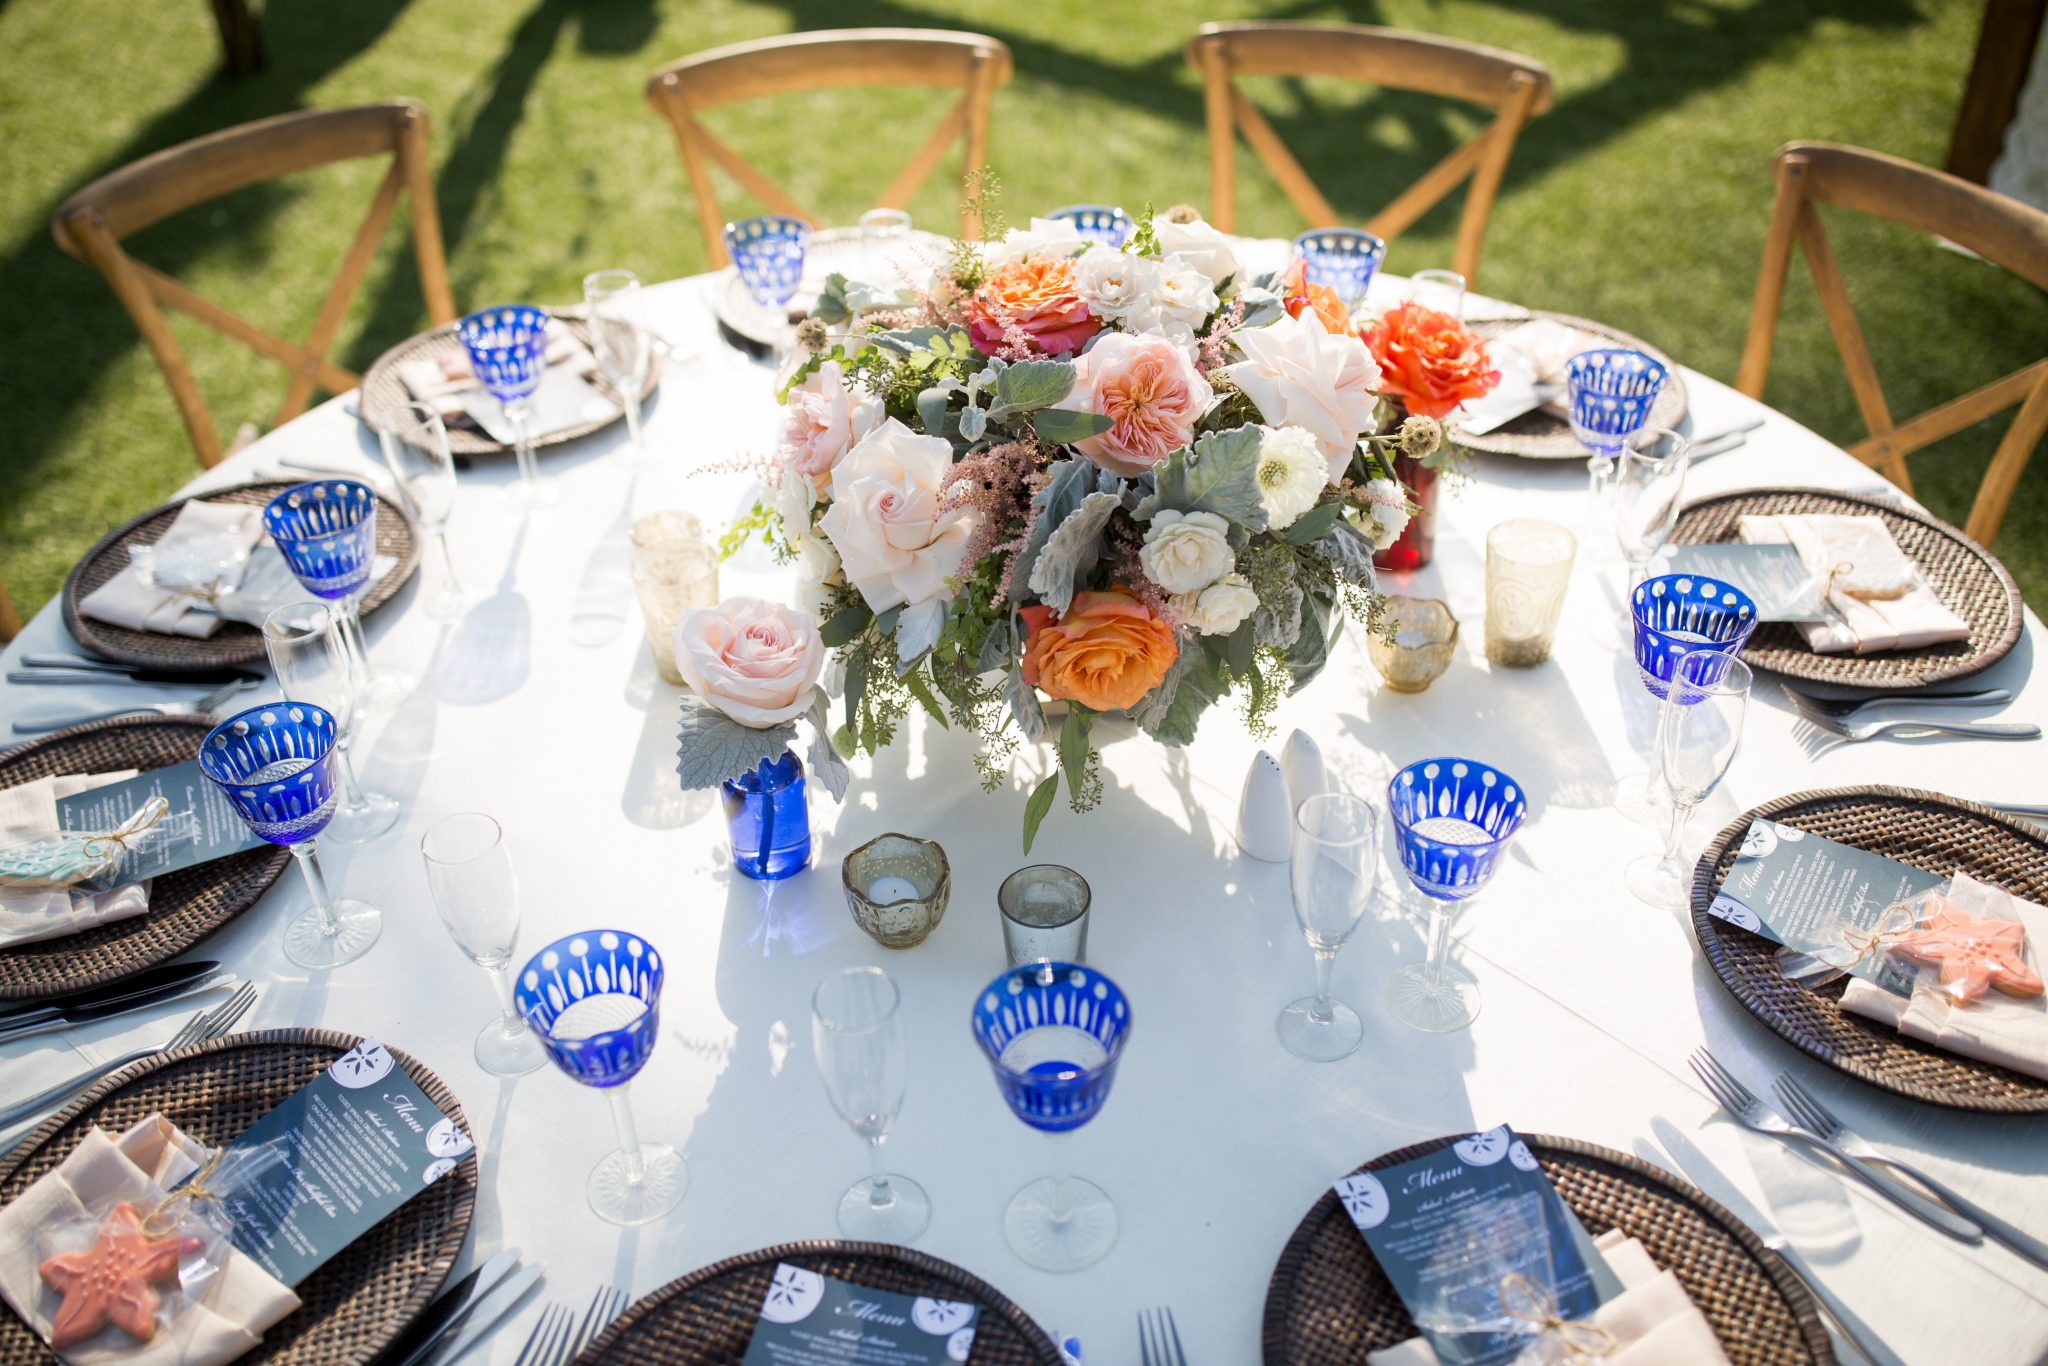 Wonderful place setting with blue glasses and a nice floral centerpiece